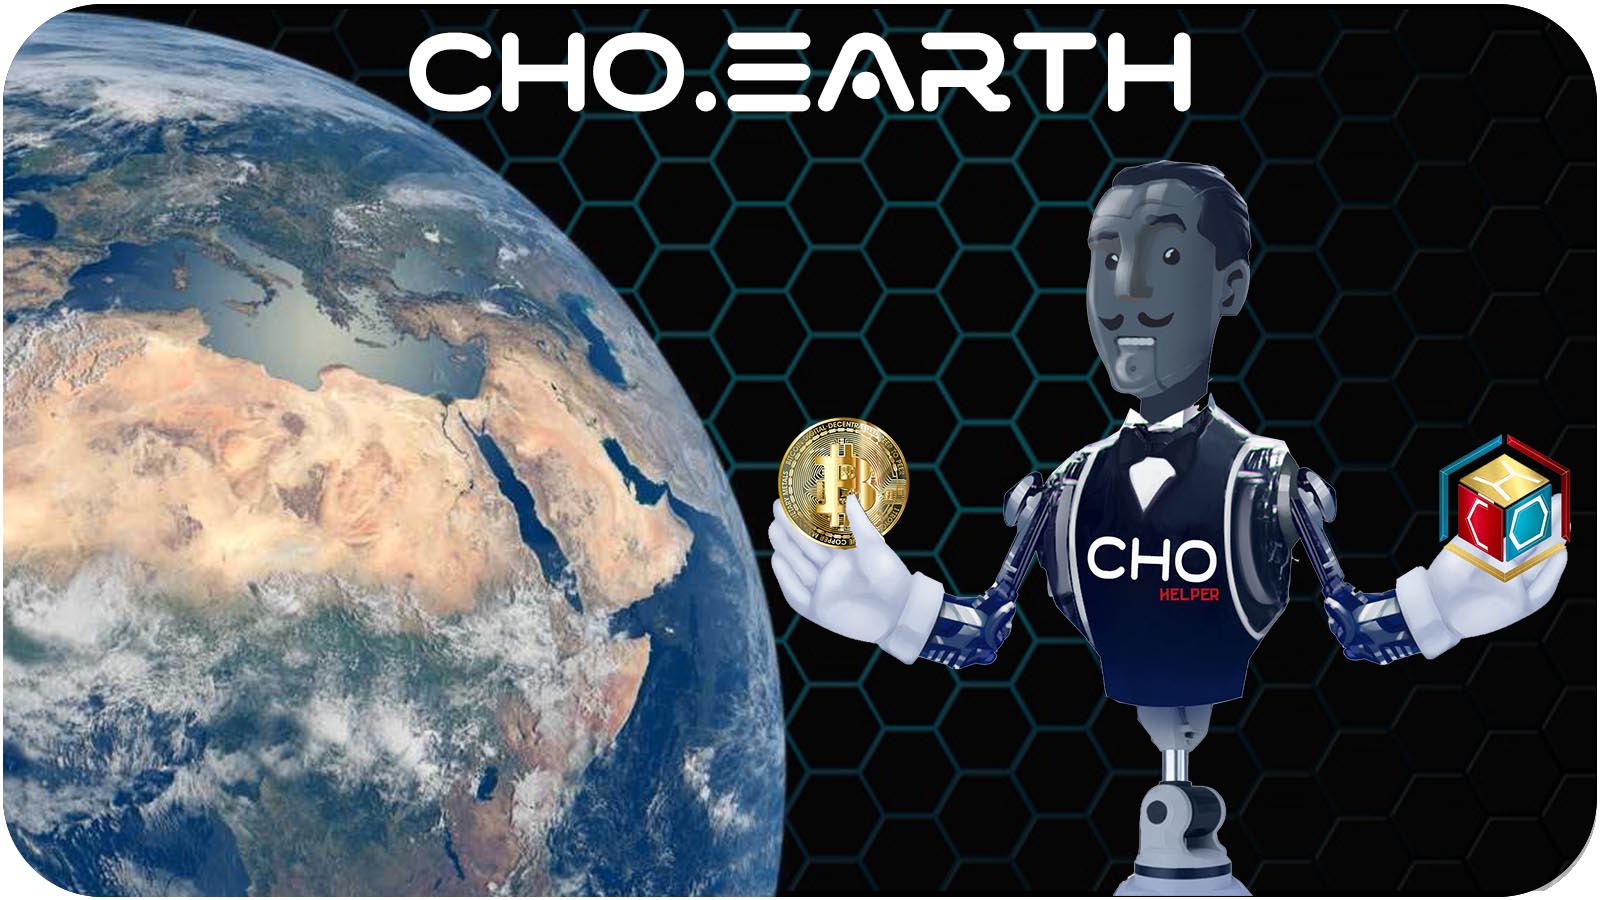 CHO.earth for Explorers of the new Digital World